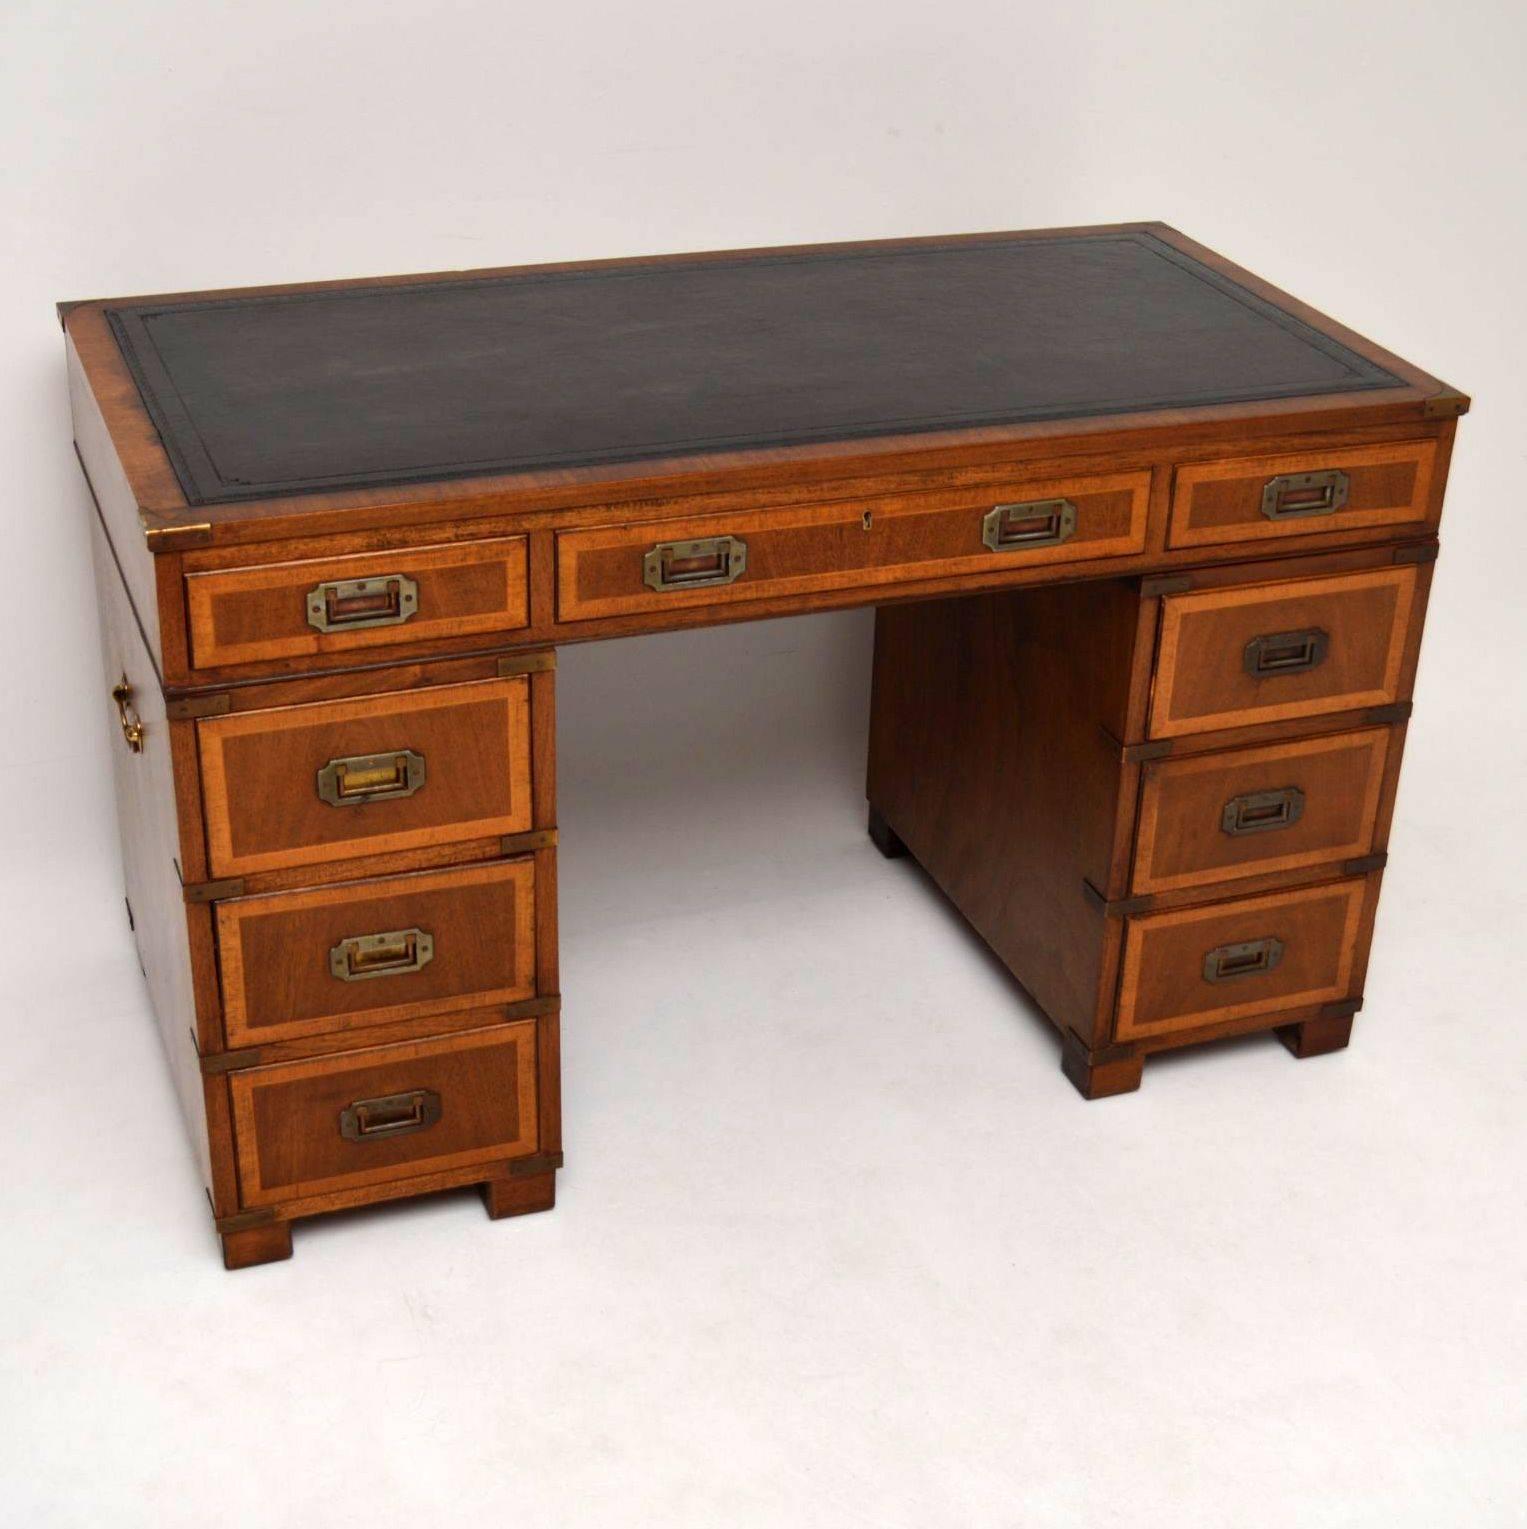 This antique mahogany 'Campaign' pedestal desk is in lovely condition and has loads of character. It has a hand-dyed tooled leather writing surface, brass carrying handles on the sides and brass corner edges. The original handles on the drawers are